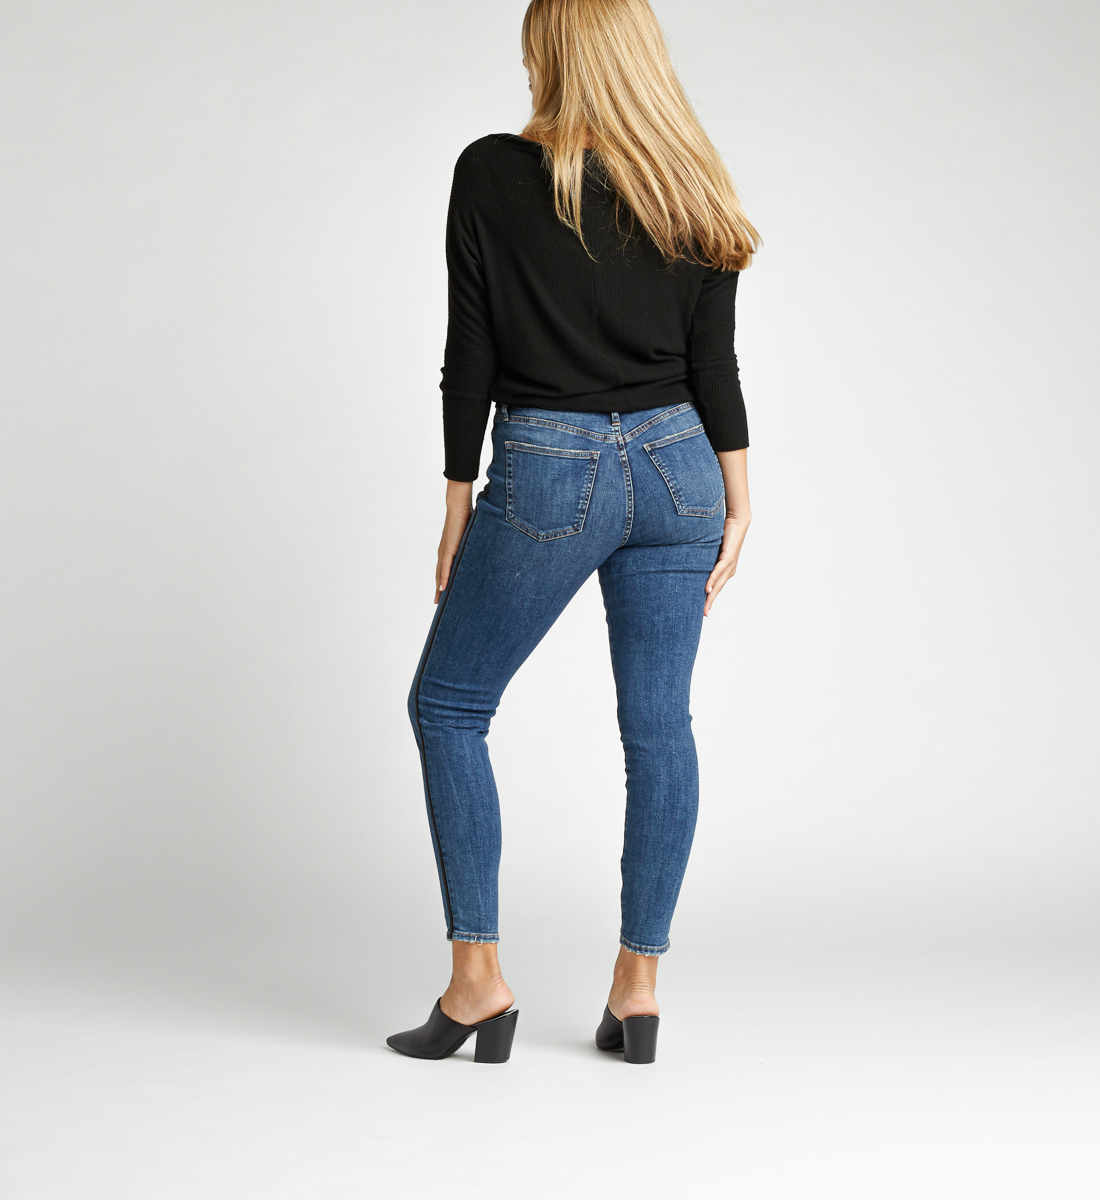 Calley Super High Rise Skinny Jeans - Silver Jeans US